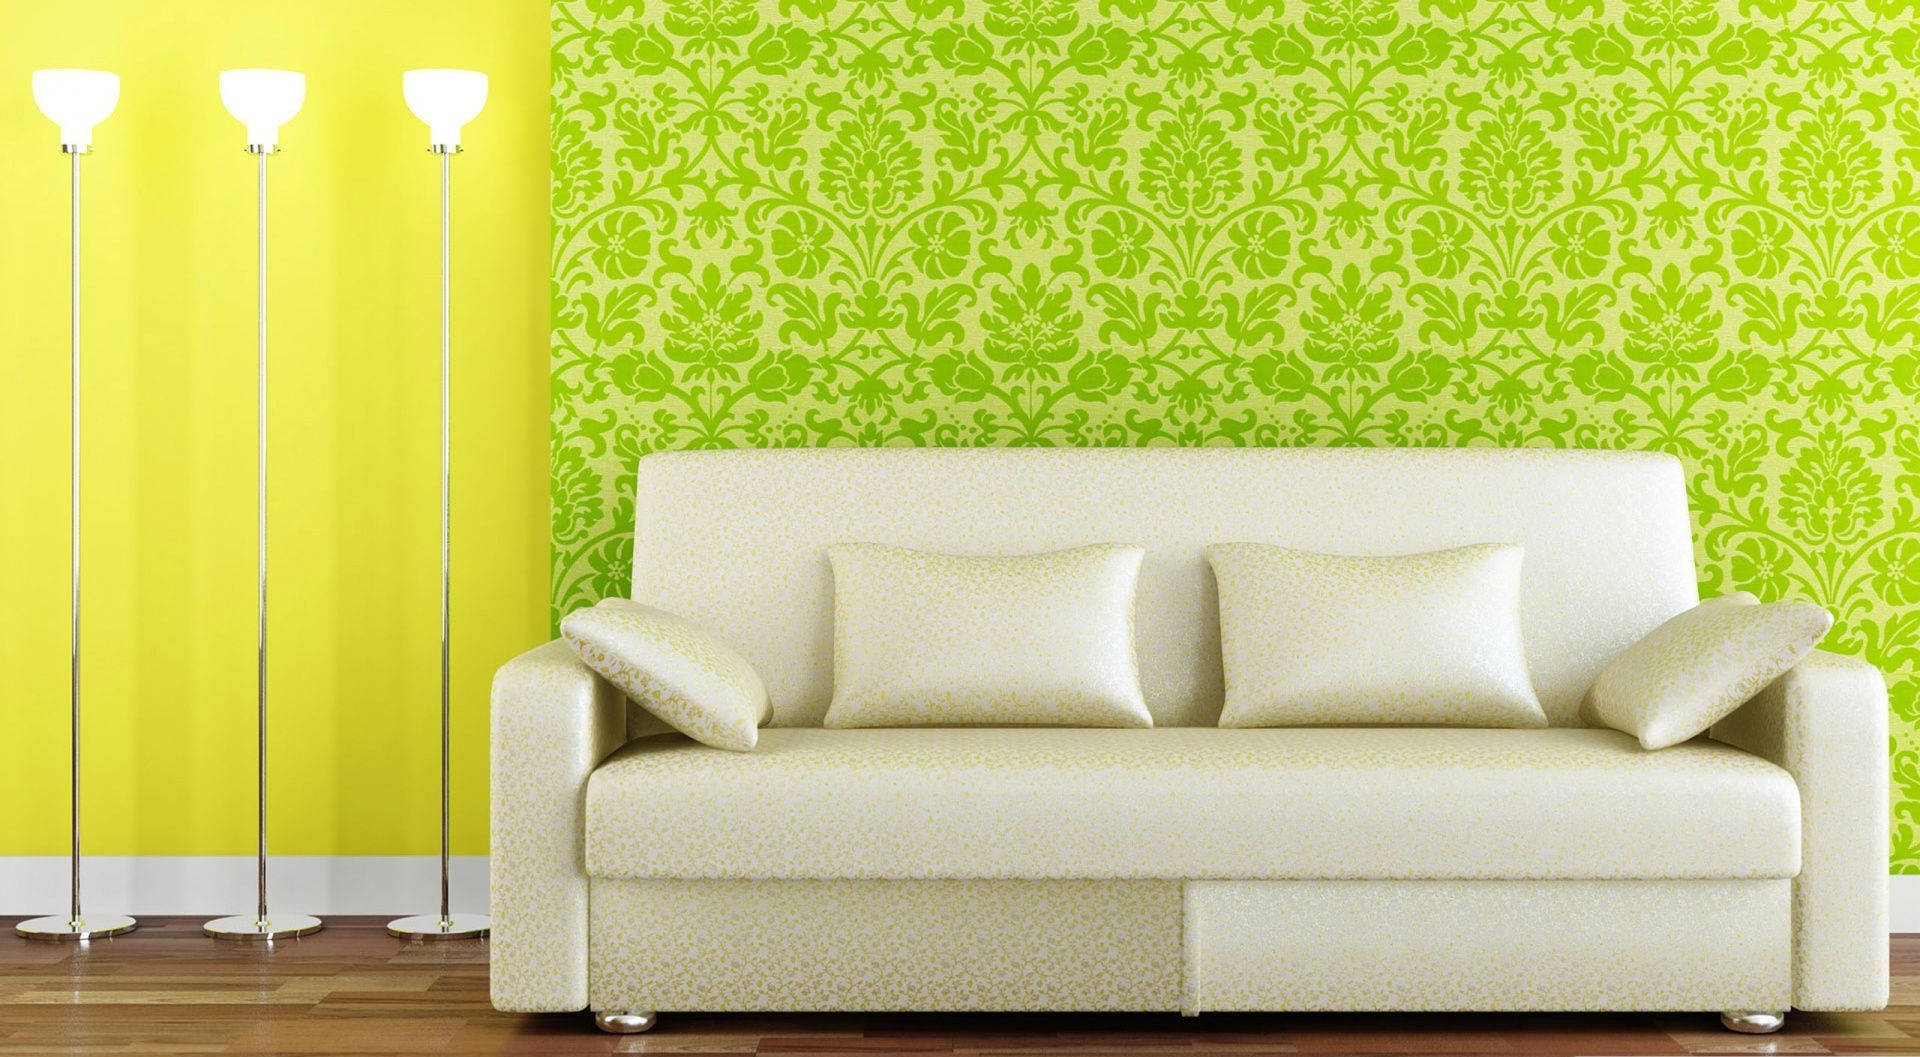 Cozy Living Room With Vibrant Green Wallpaper